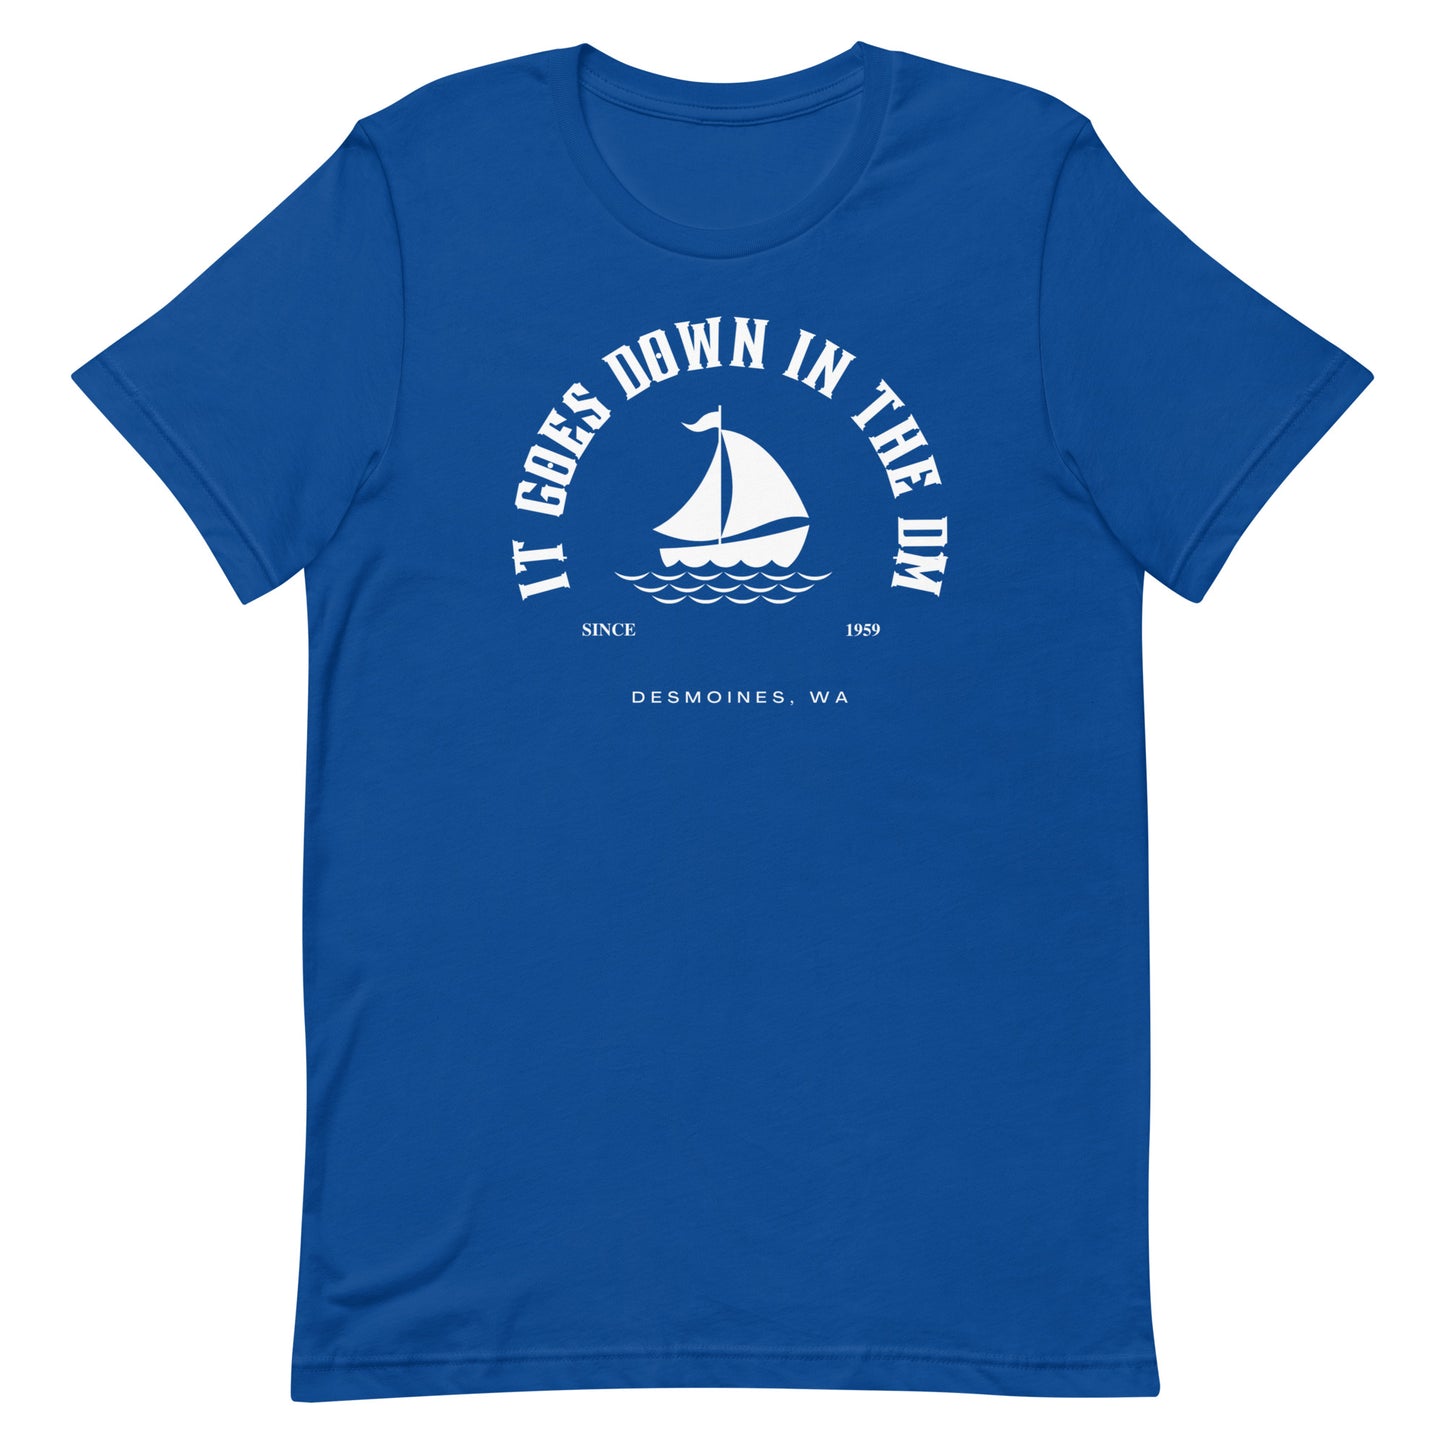 Down in the DM Unisex t-shirt